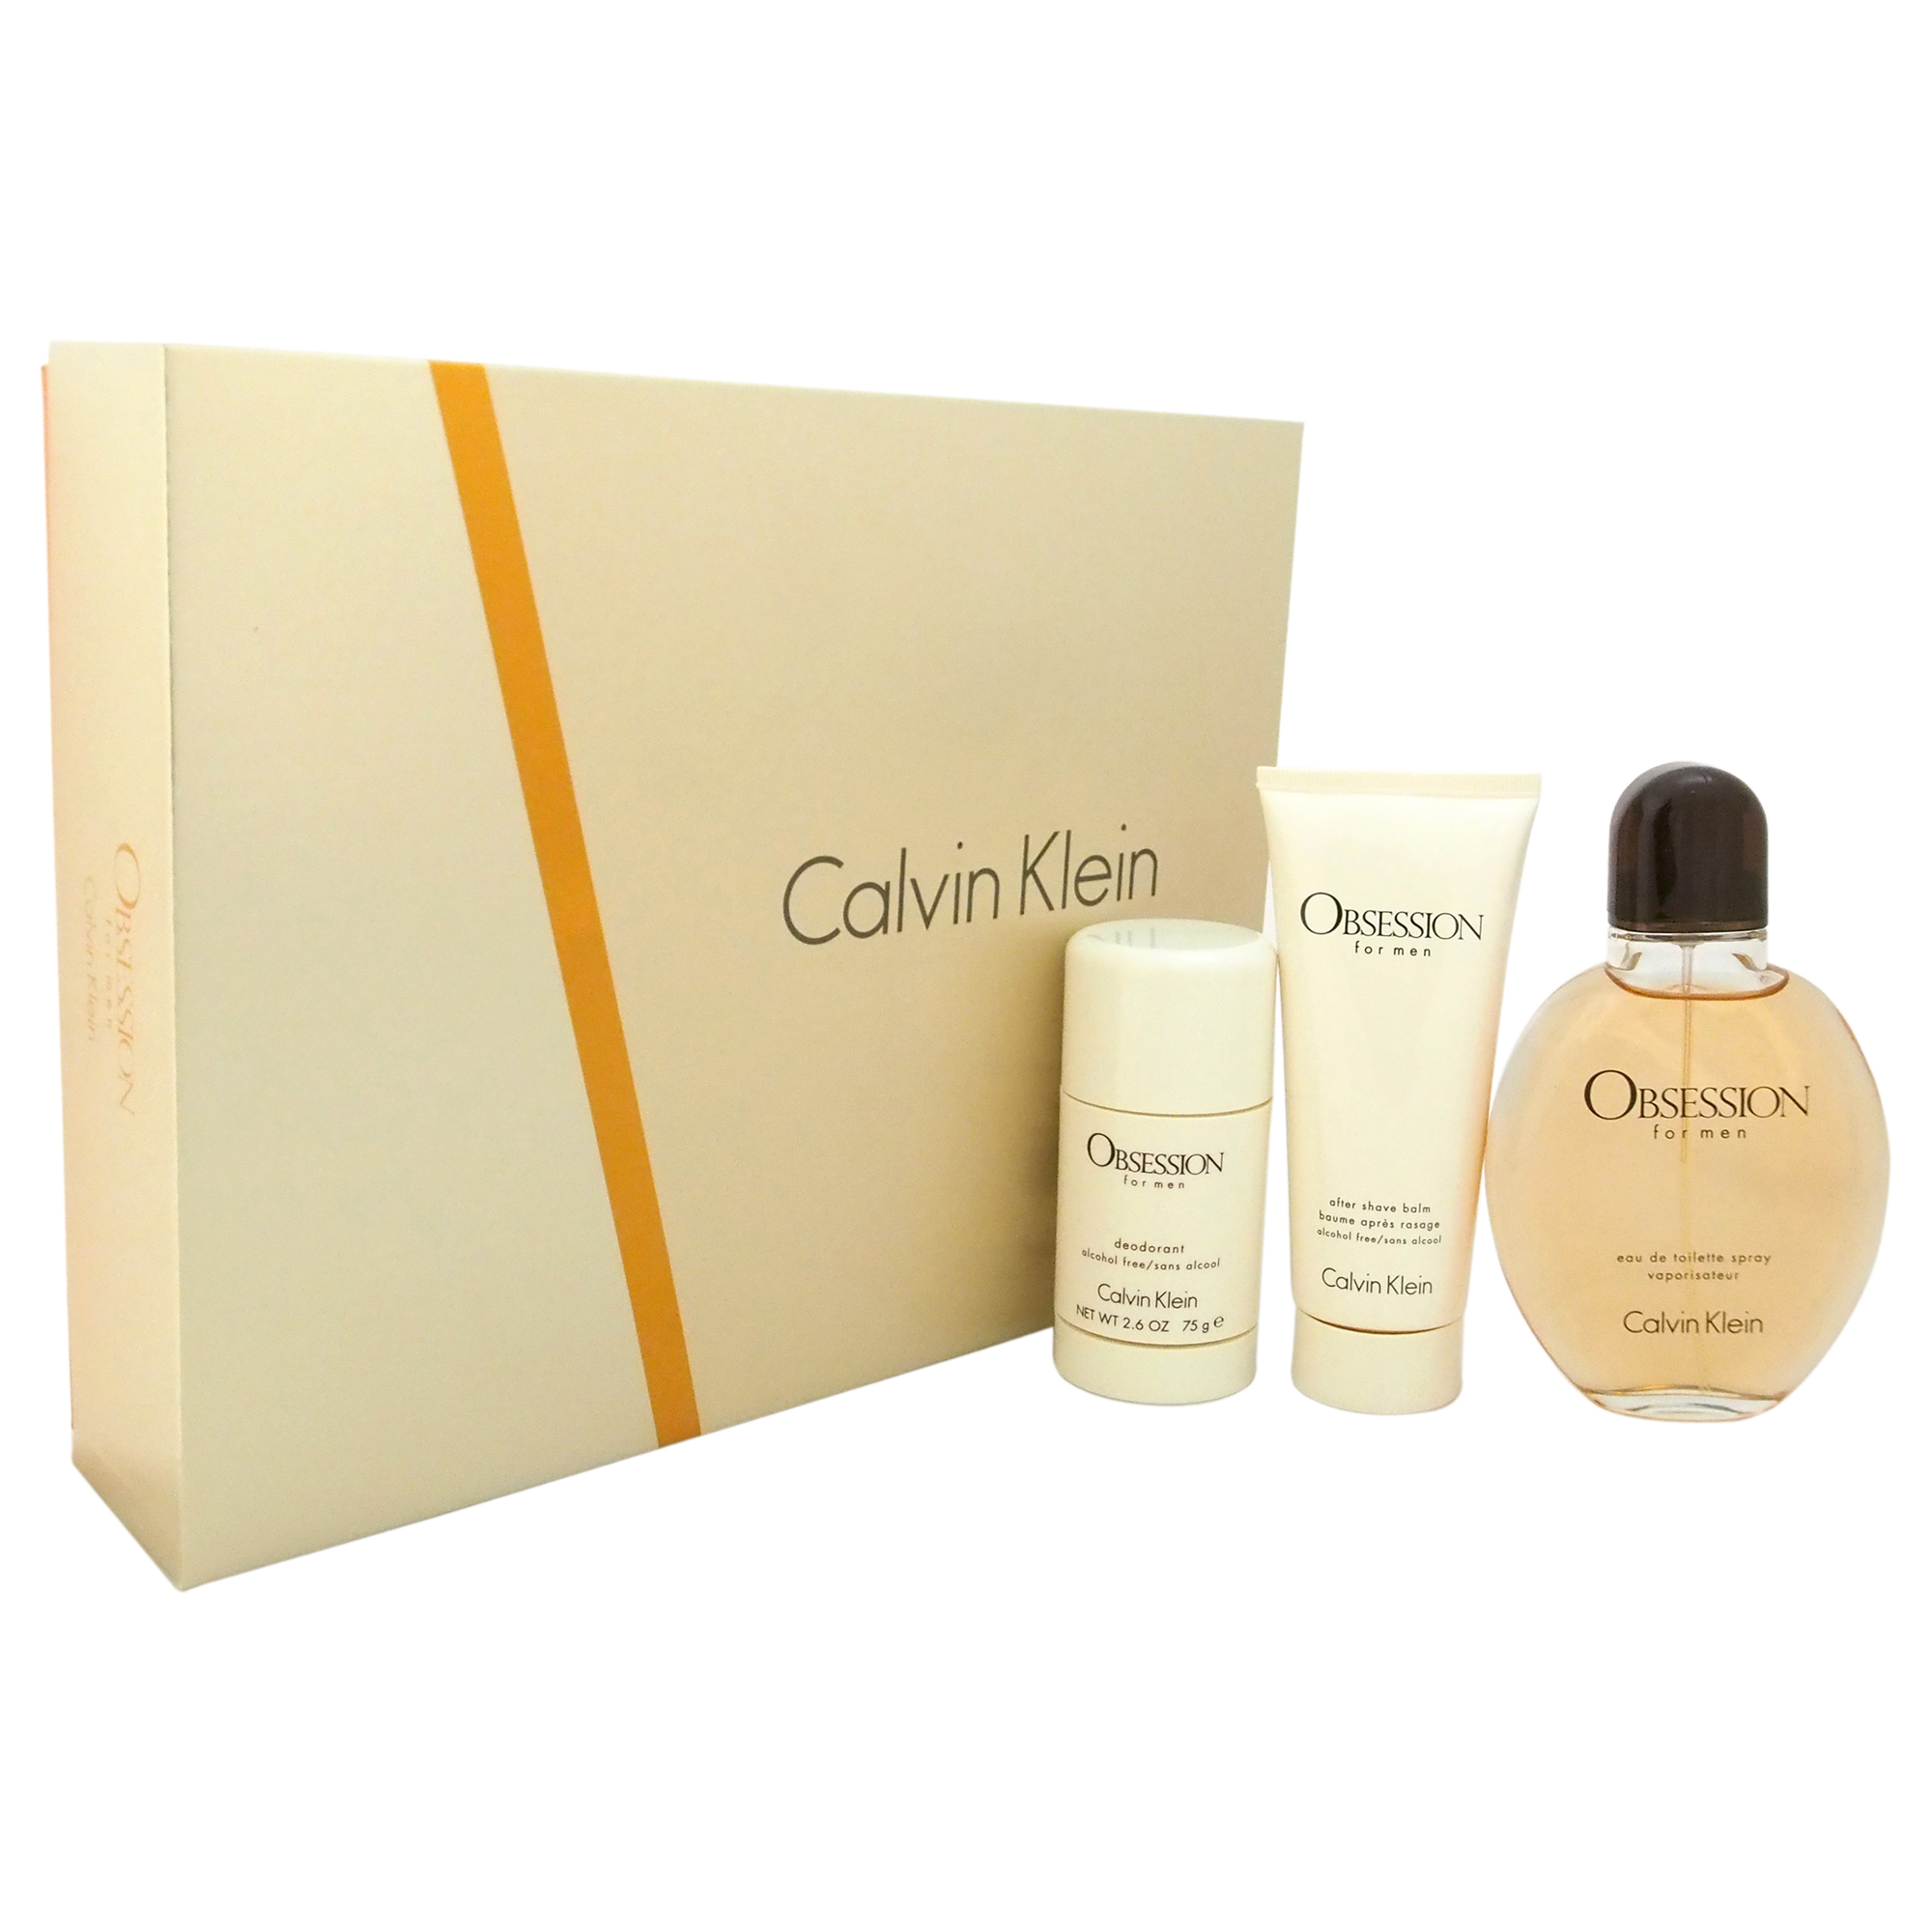 Obsession by Calvin Klein for Men - 3 Pc Gift Set 4oz EDT Spray, 2.6oz Deodorant Stick, 3.4oz After Shave Balm